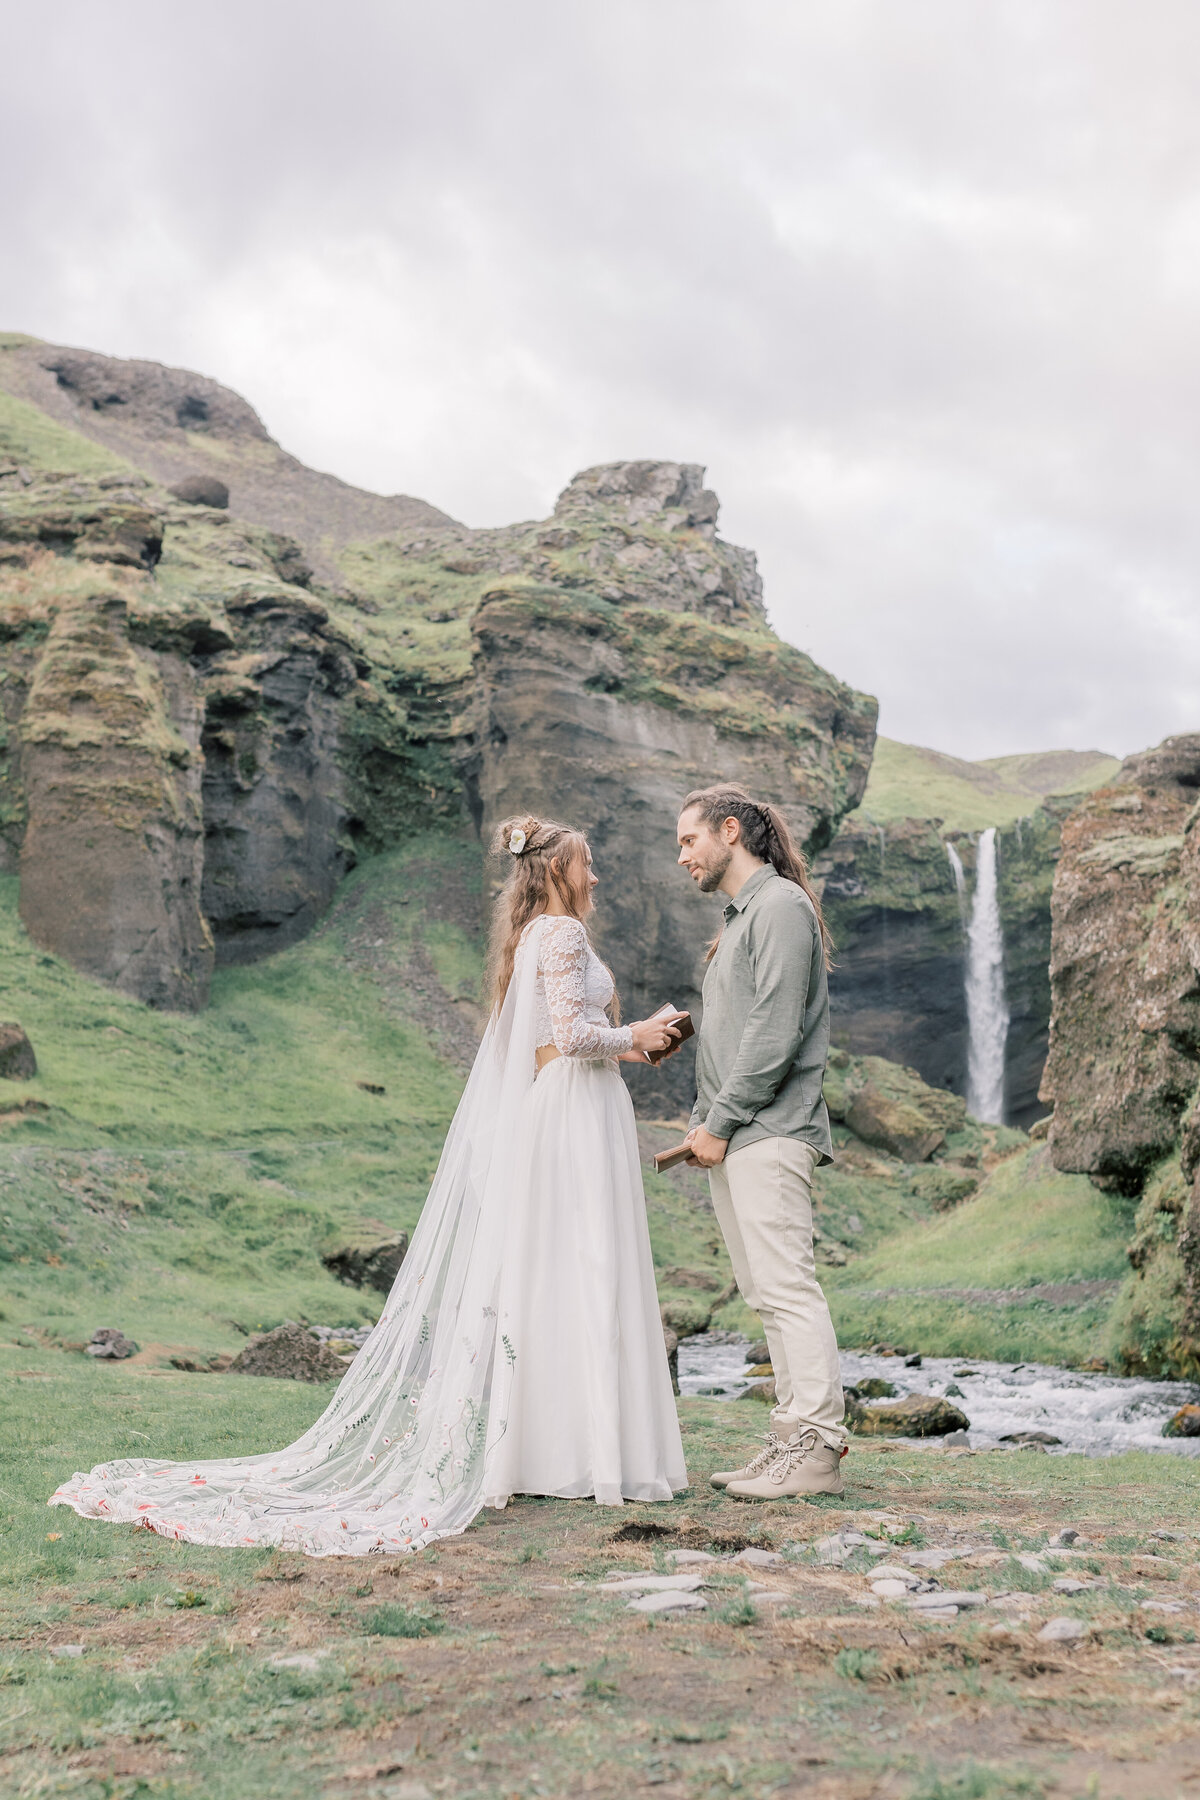 Couple exchanging vows during a private ceremony in front  of a waterfall in a canyon in Southern Iceland.